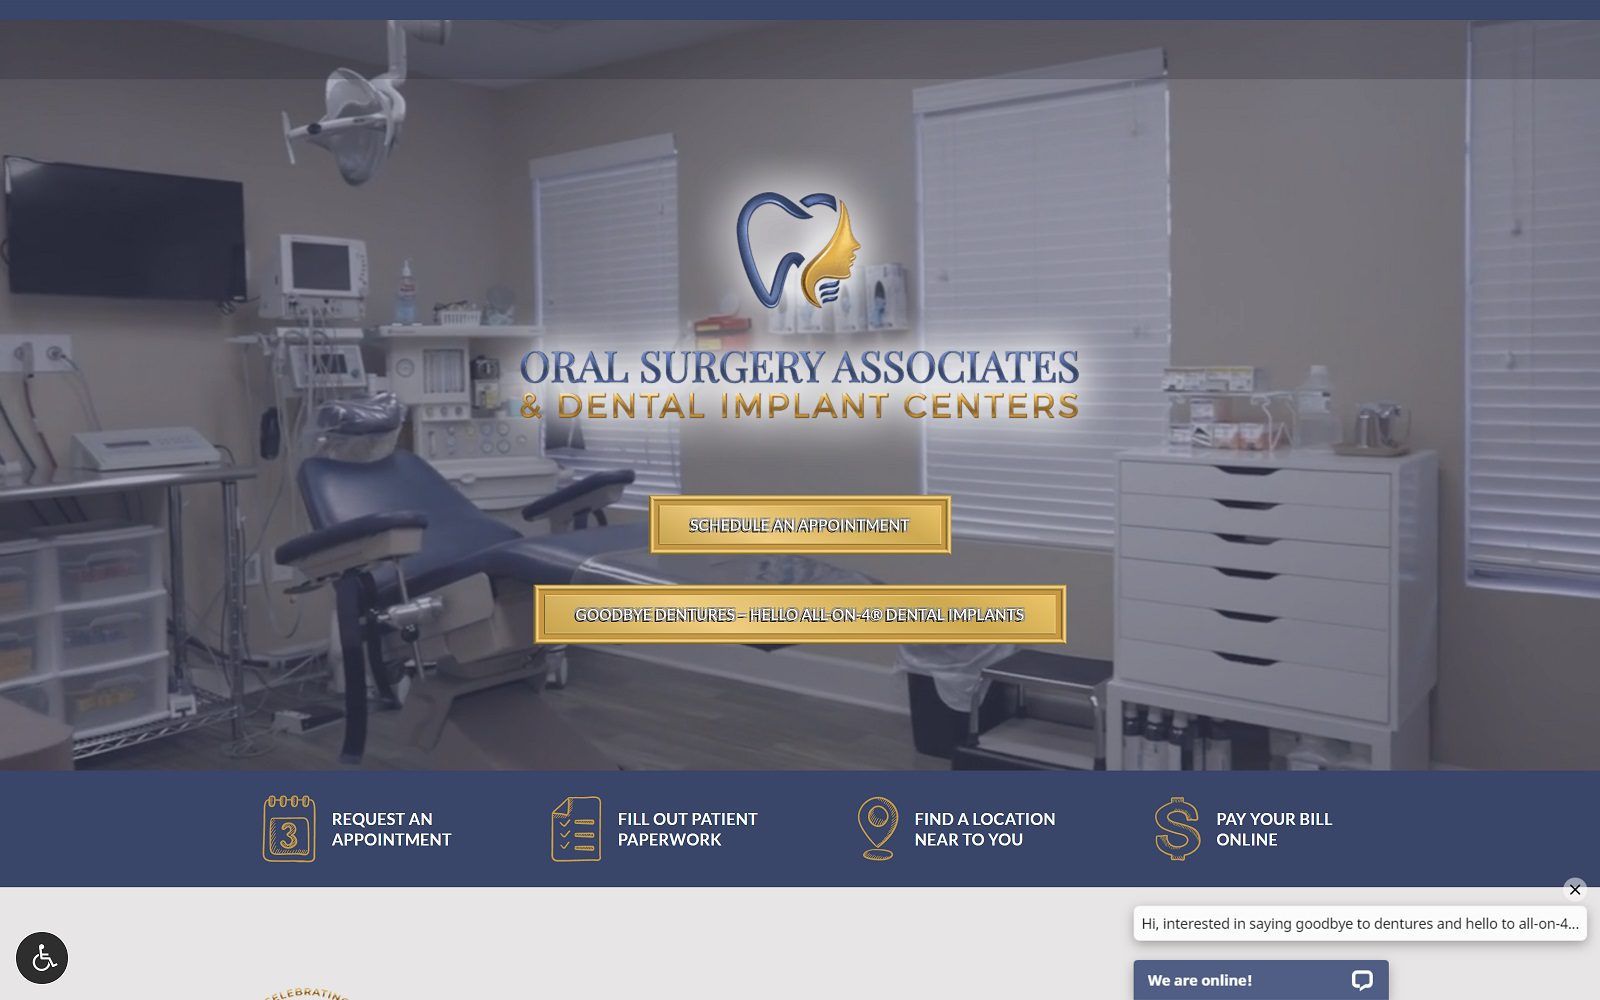 The screenshot of oral surgery associates and dental implant centers website